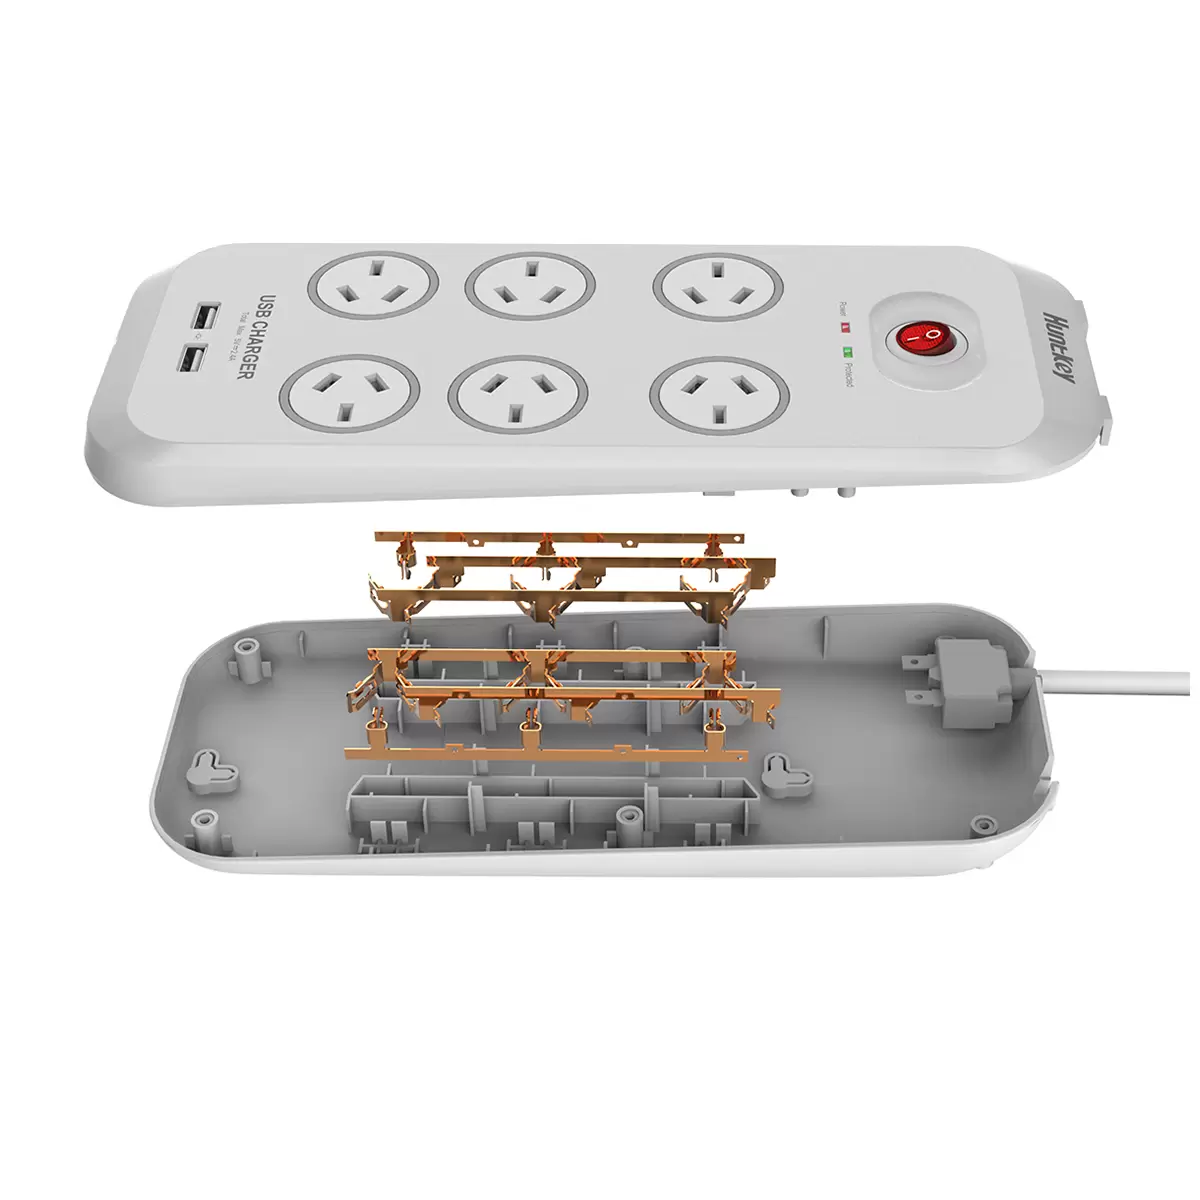 Huntkey 6 Way Powerboard With 2 USB Port And Surge Protection Pack 2 Piece